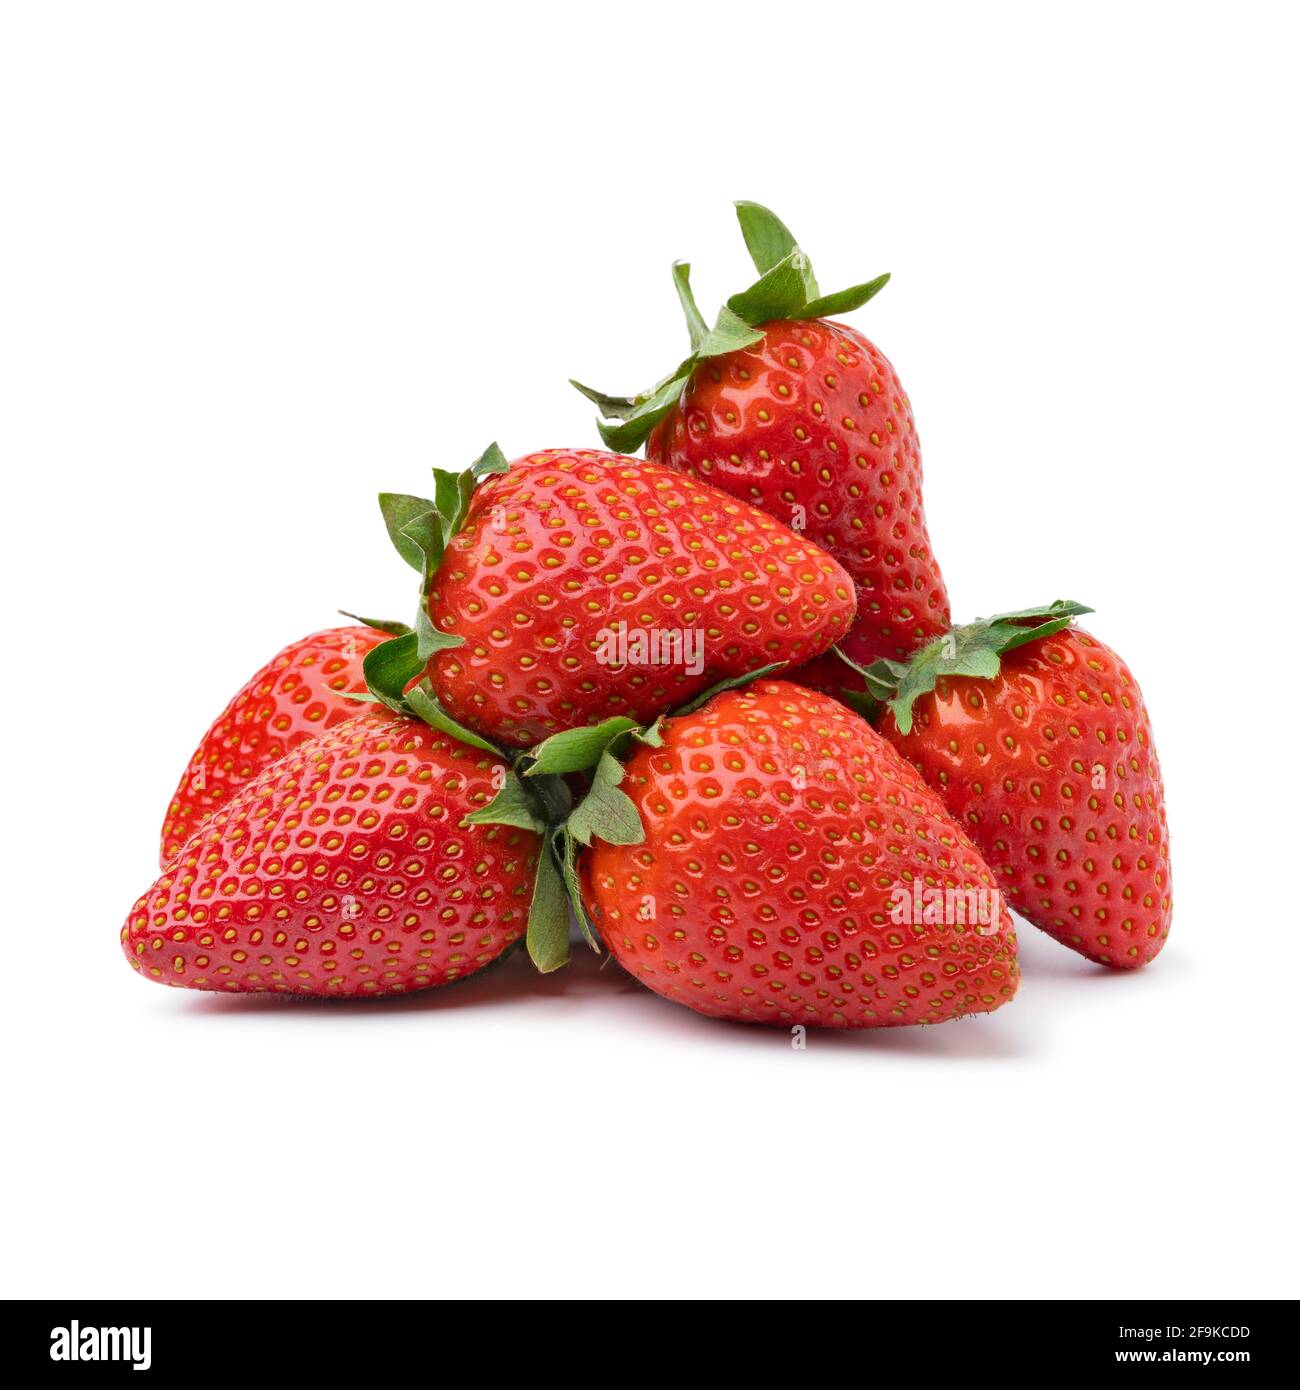 Heap of fresh picked red ripe strawberries isolated on white background Stock Photo